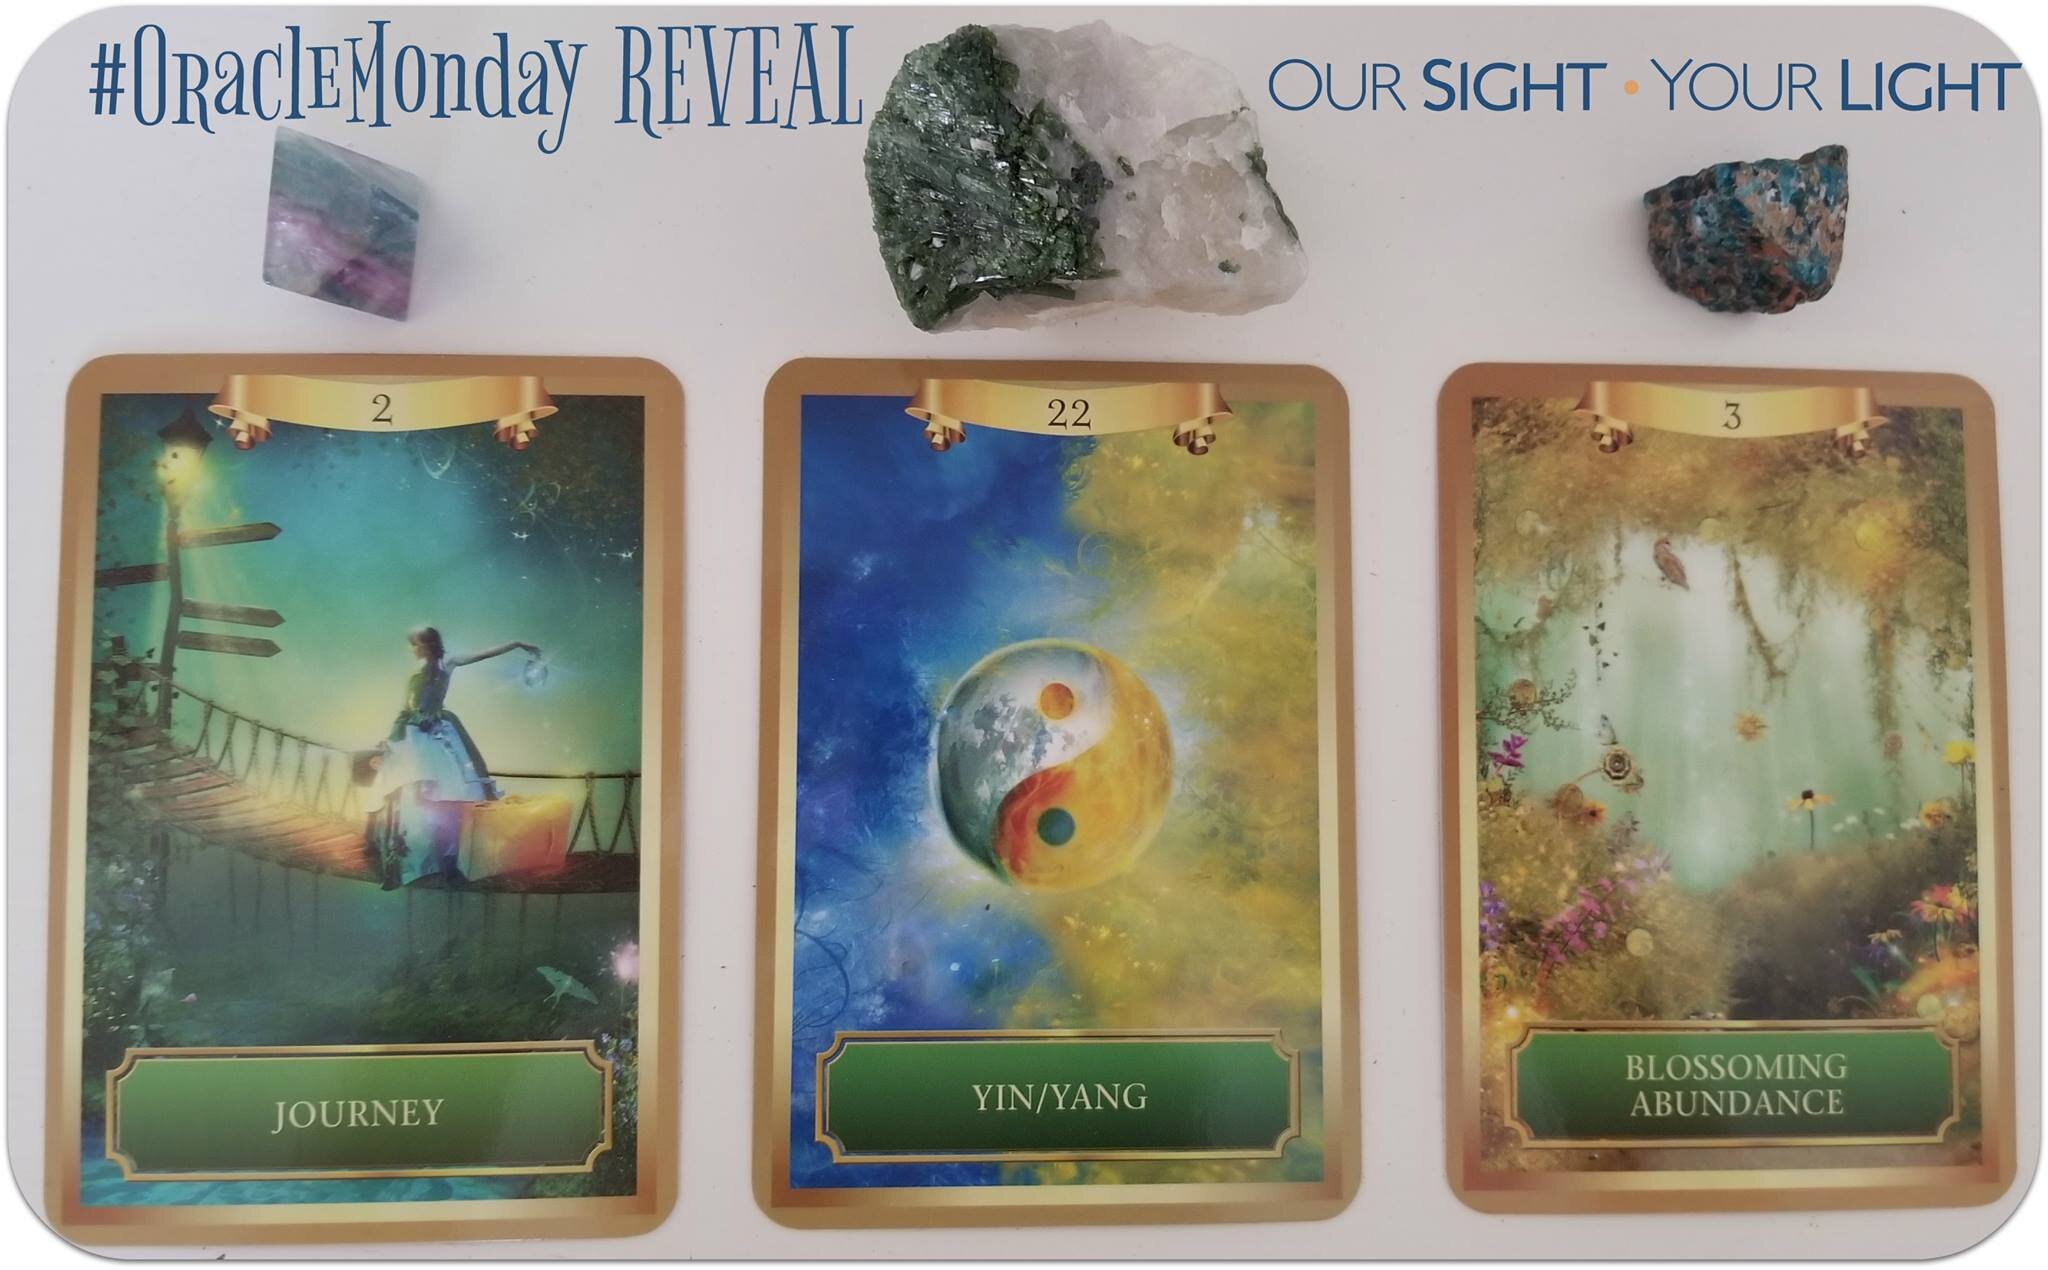 OracleMonday - November 9, 2020 — Our Sight Your Light